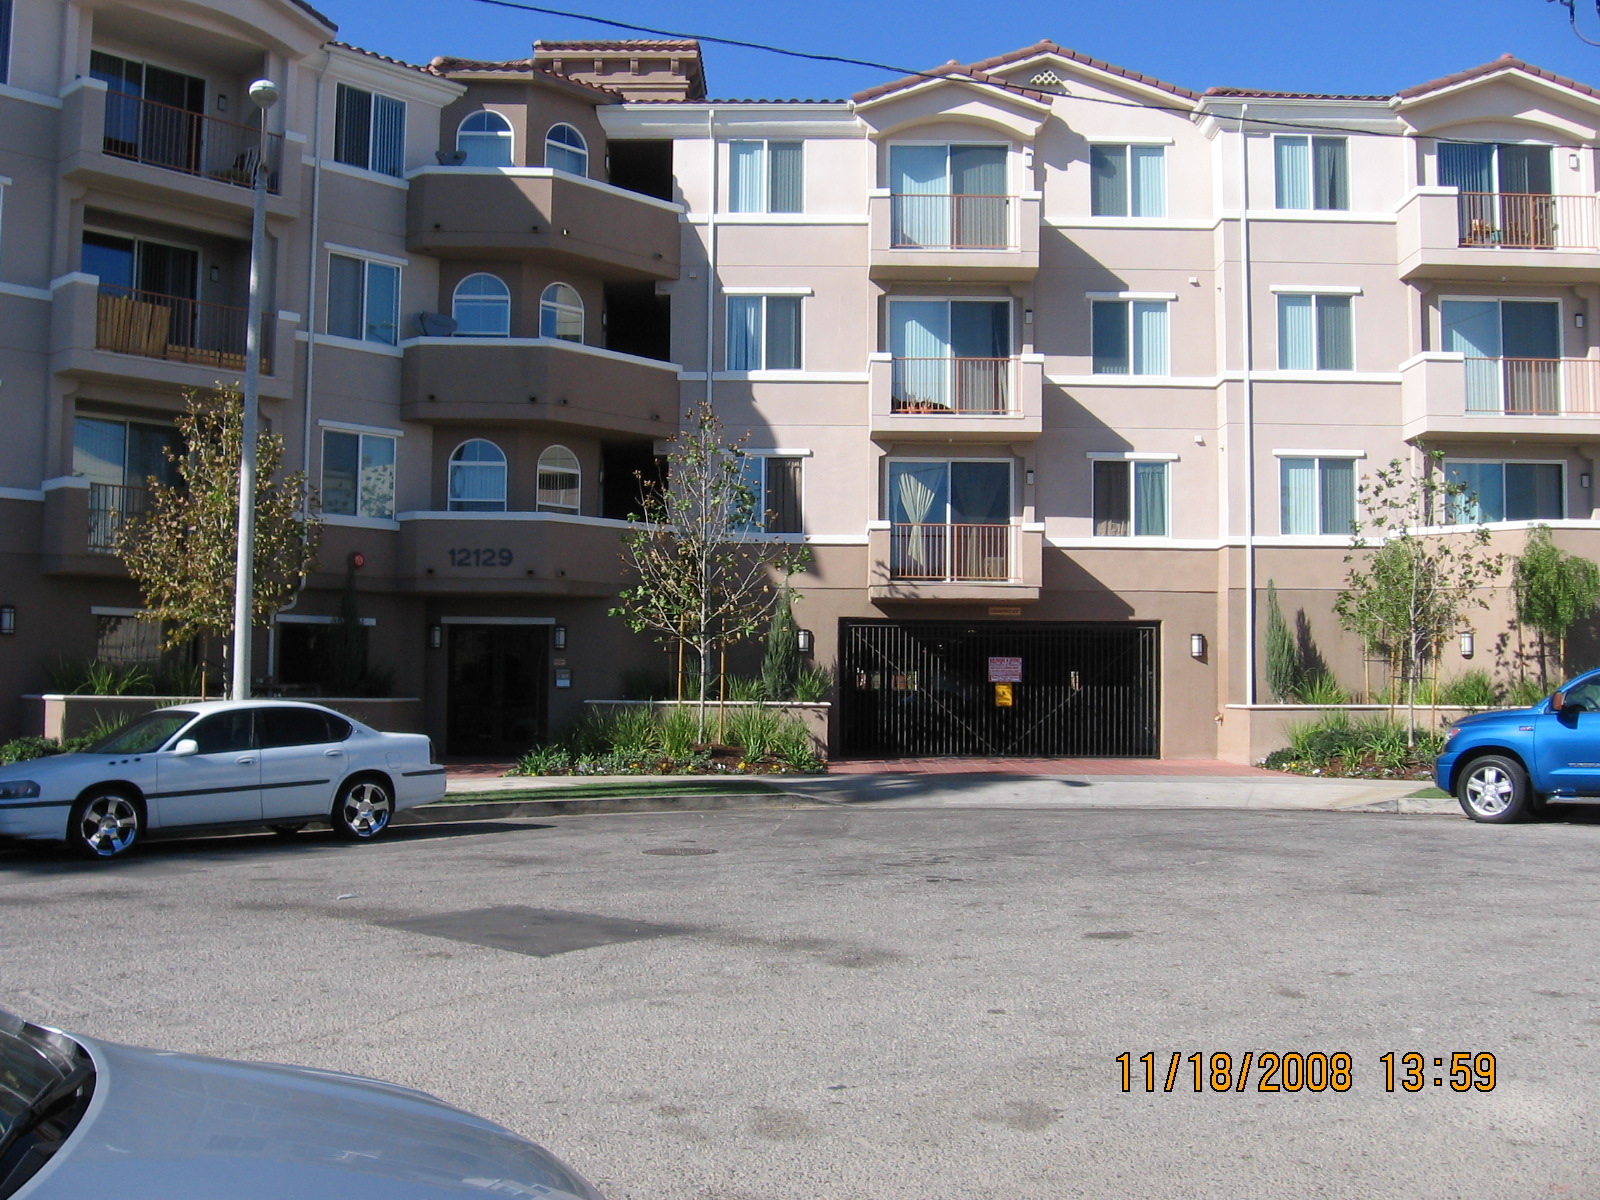 Front view of 4 floor family apartemnt building in culdesac with balconies and garage entrance on first floor